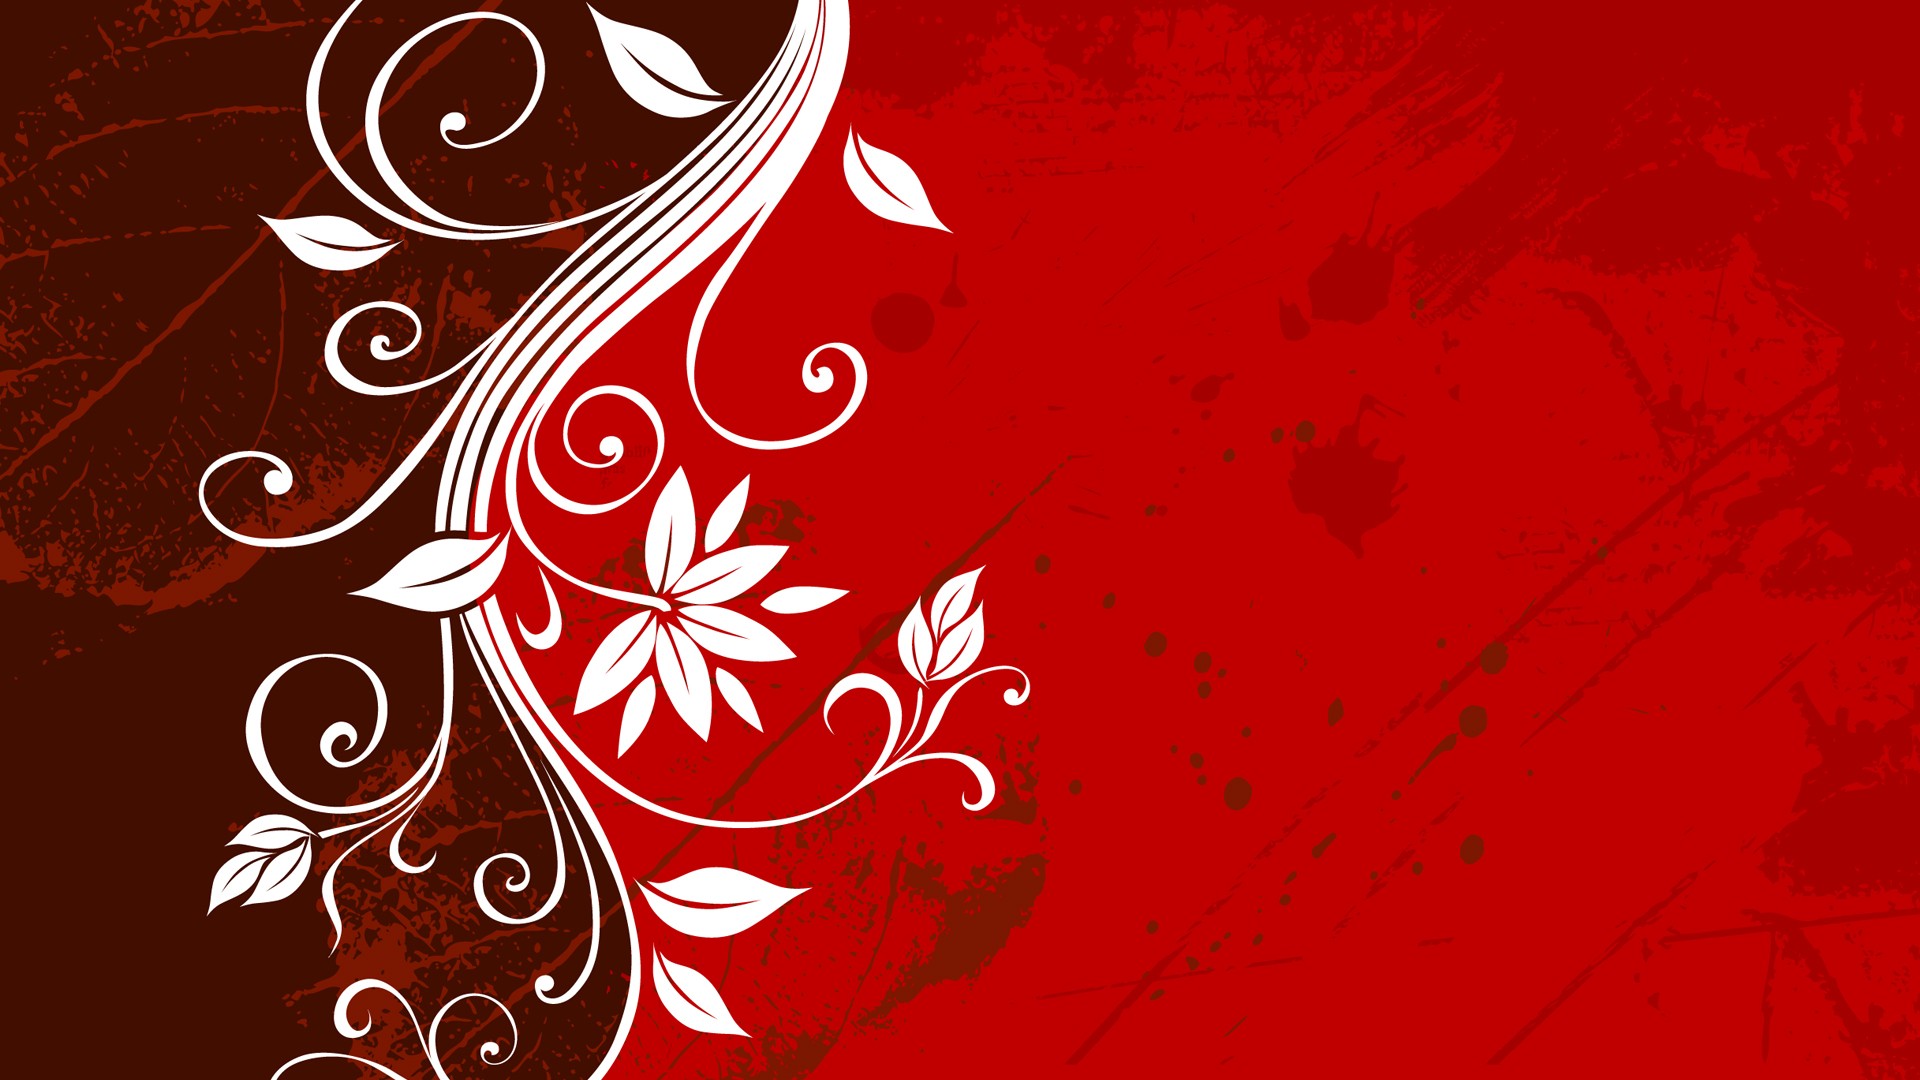 Red Grunge Free Vector Graphics